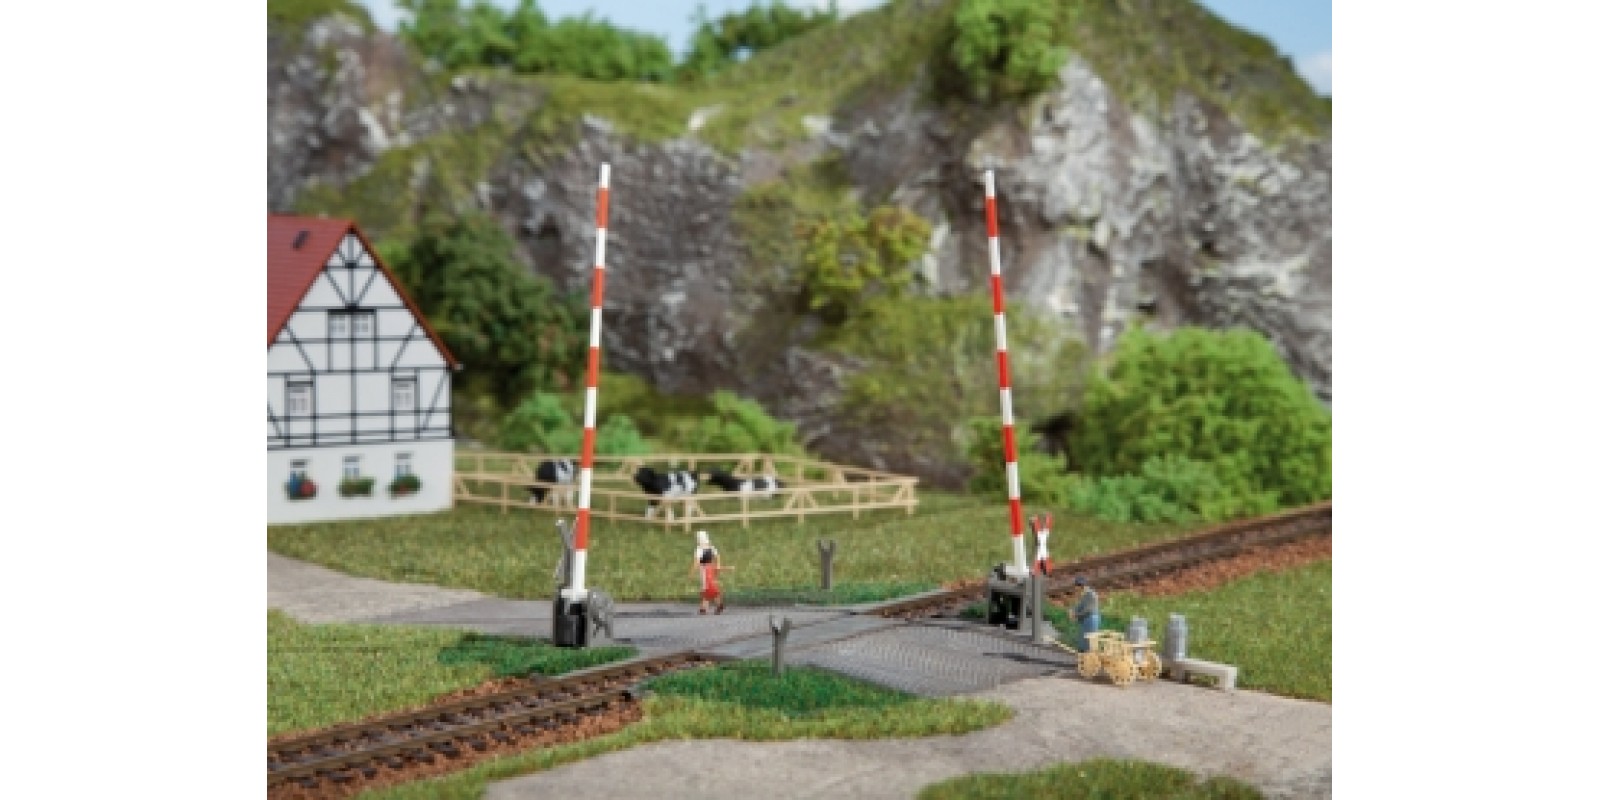 AU41604 Level crossing with barrier